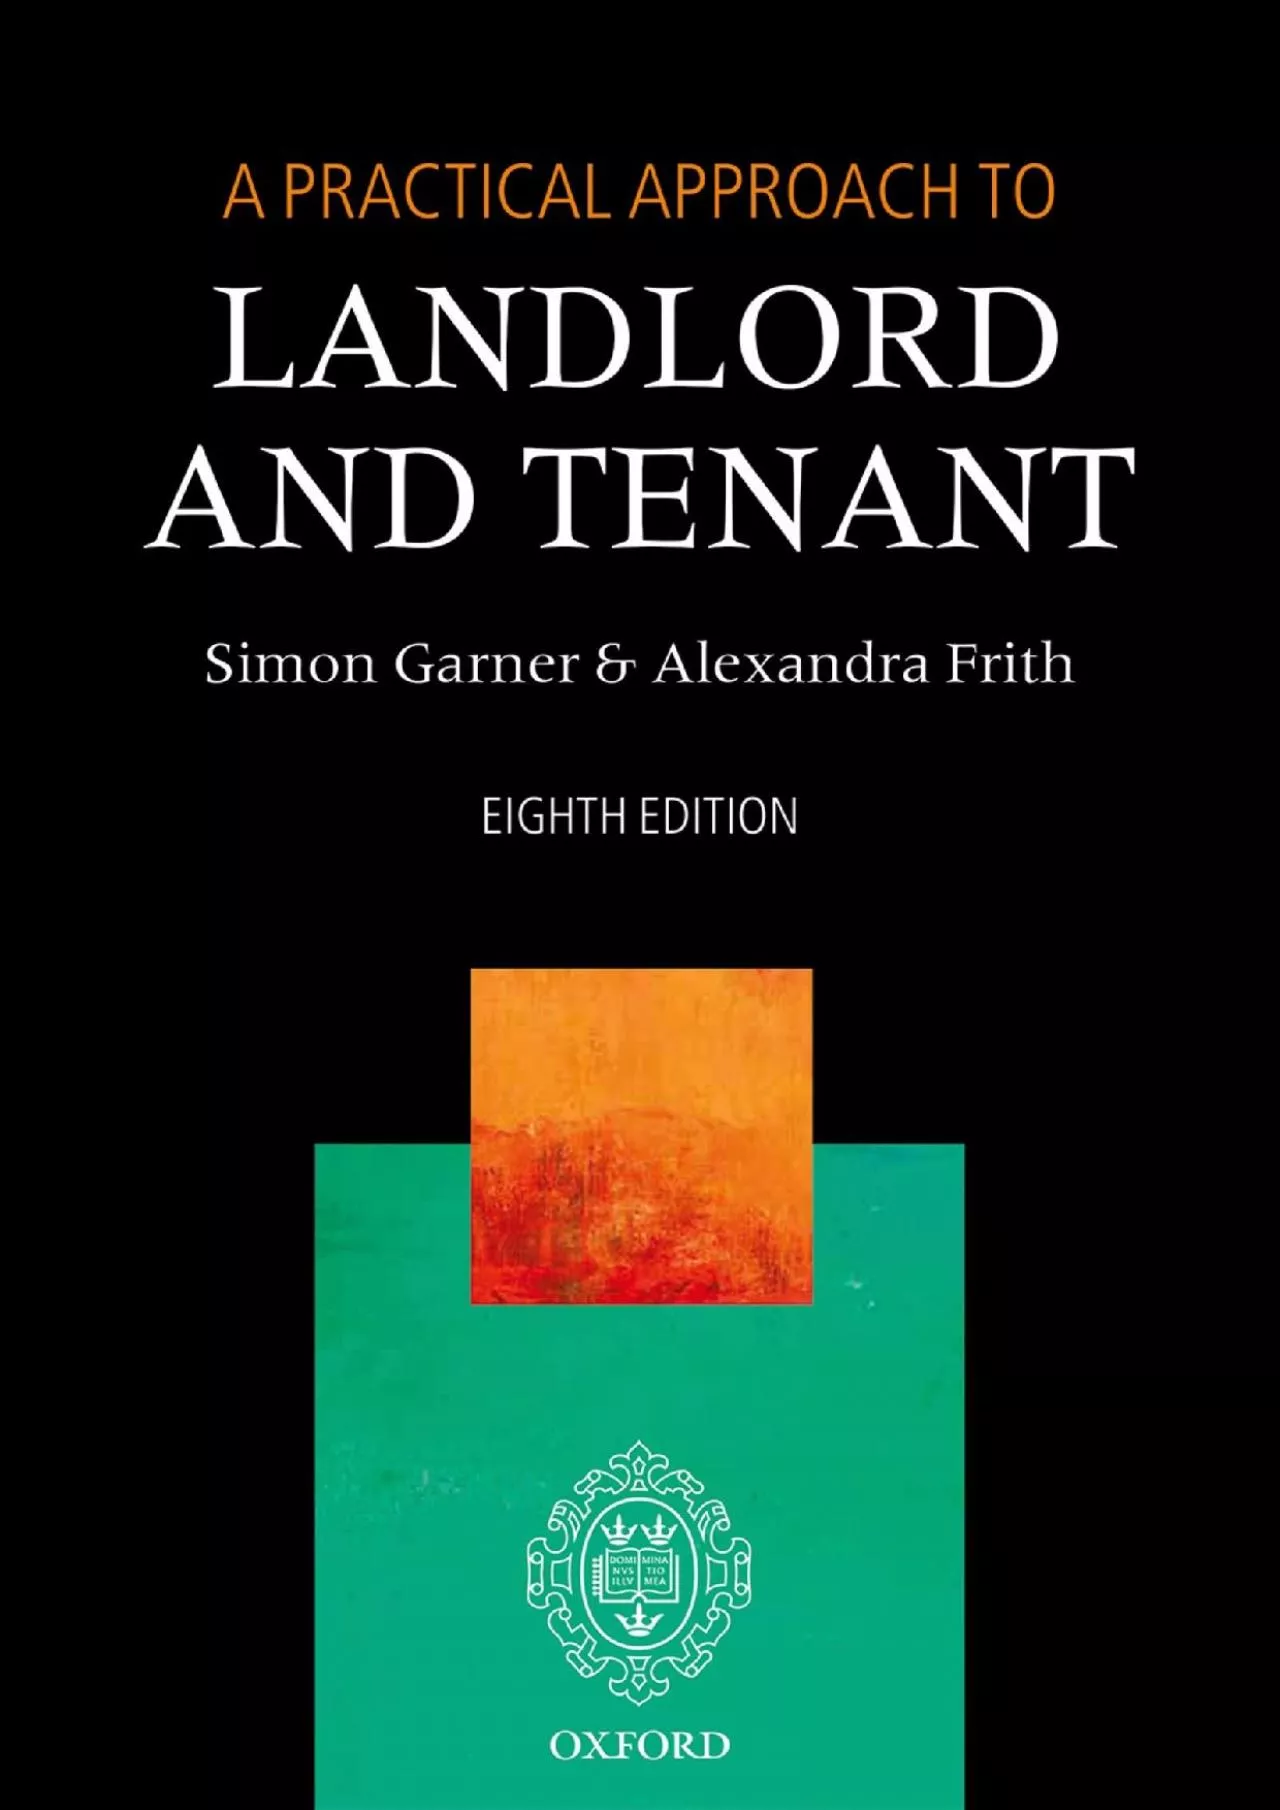 Download Book [PDF] A Practical Approach to Landlord and Tenant